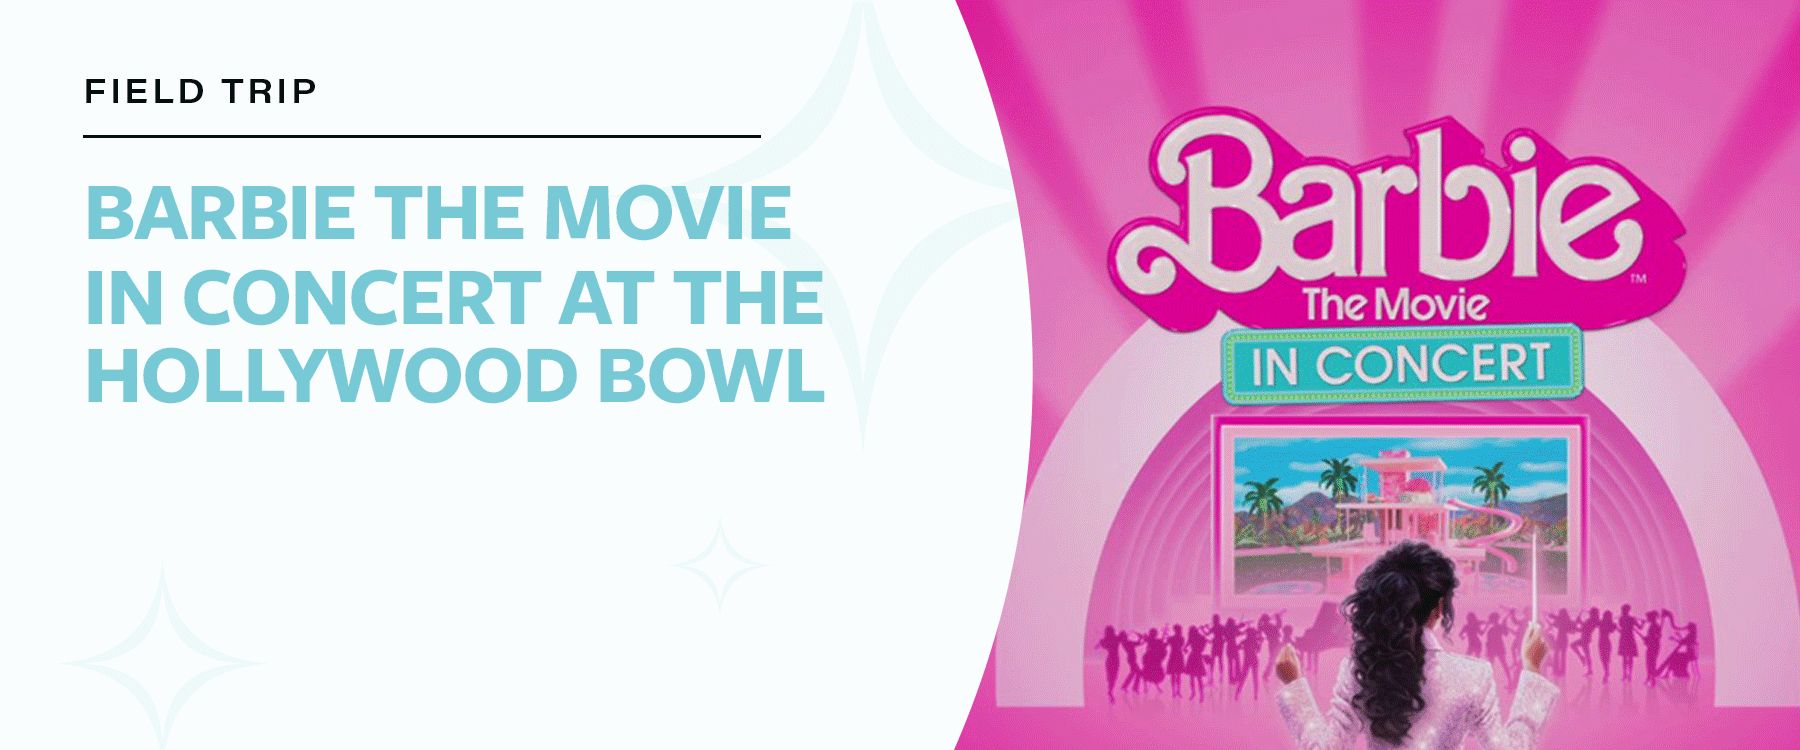 Field Trip: Barbie the Movie In Concert at the Hollywood Bowl